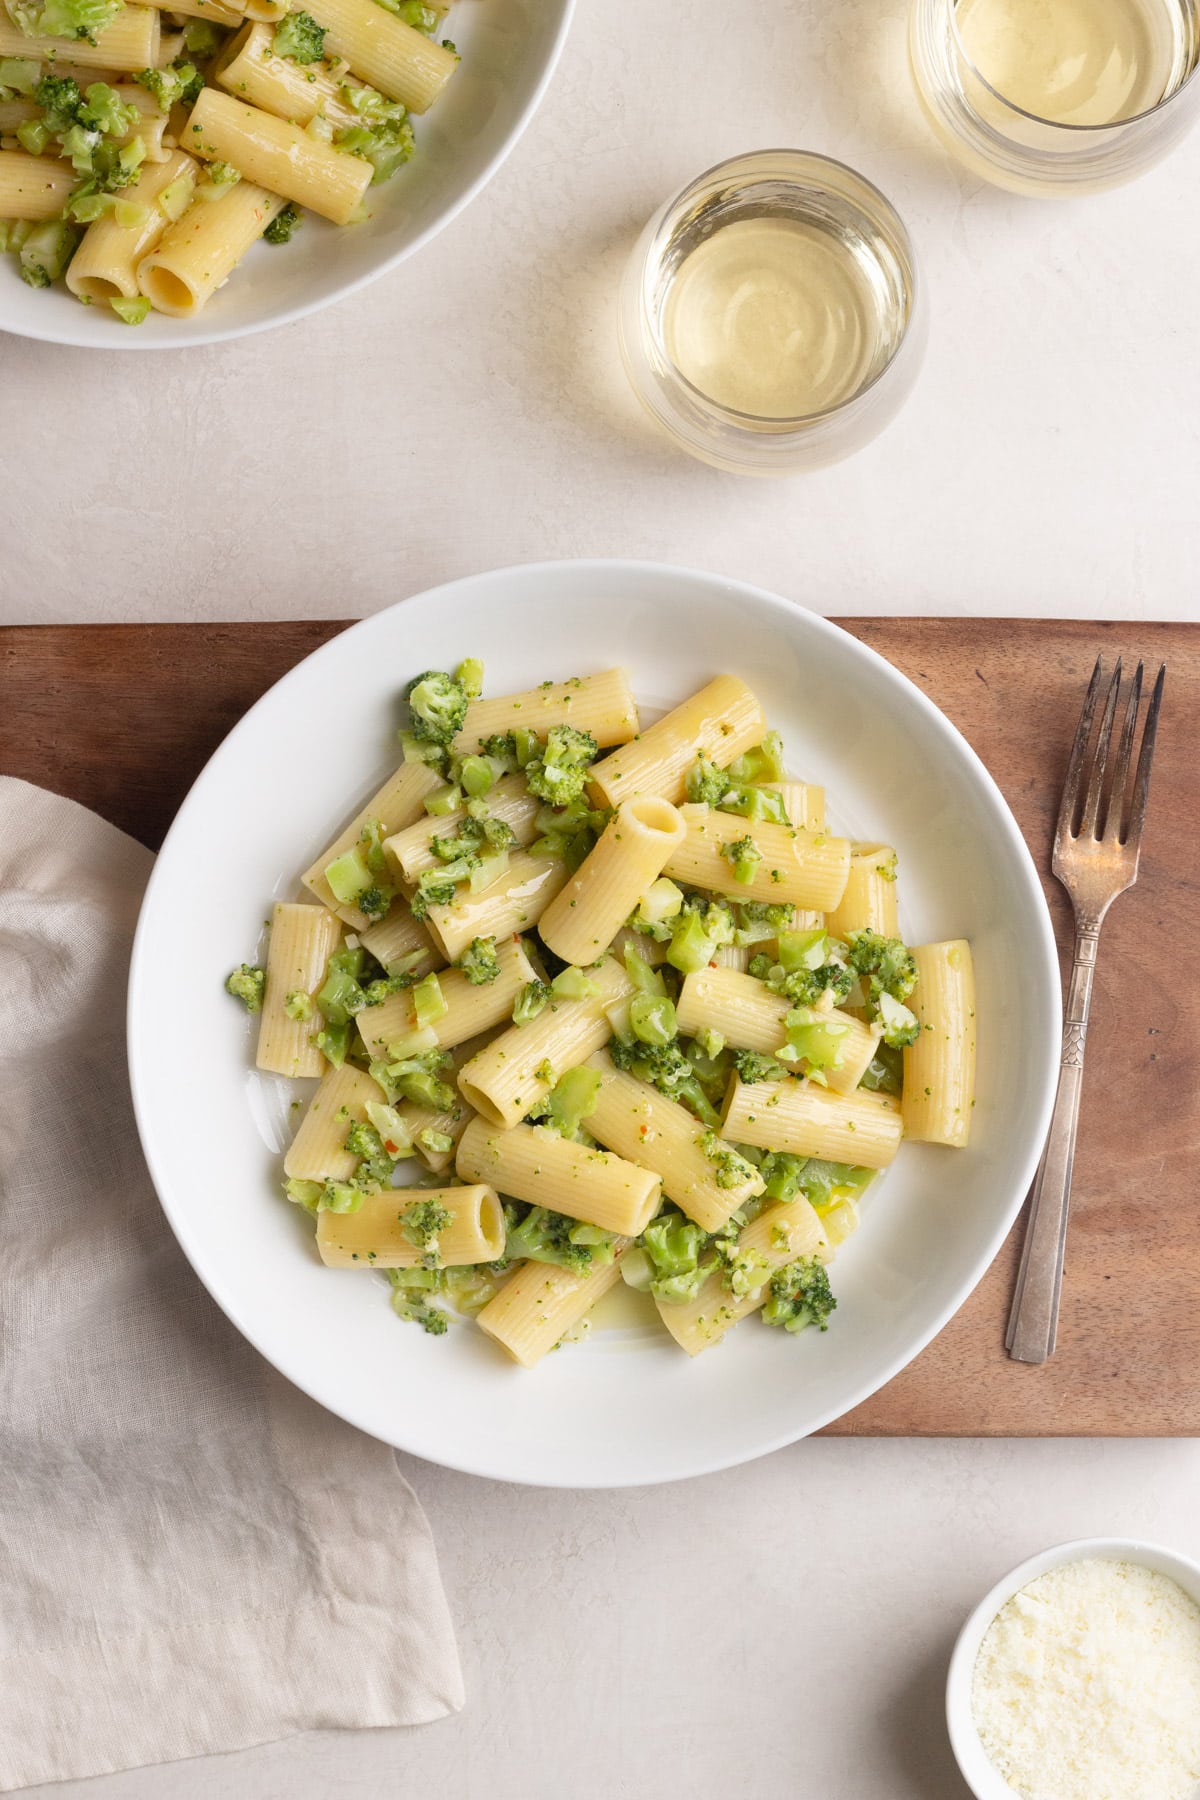 Italian Broccoli Pasta in a white bowl on a wood board on a cream surface surrounded by a dishcloth, white wine, a fork and grated cheese.